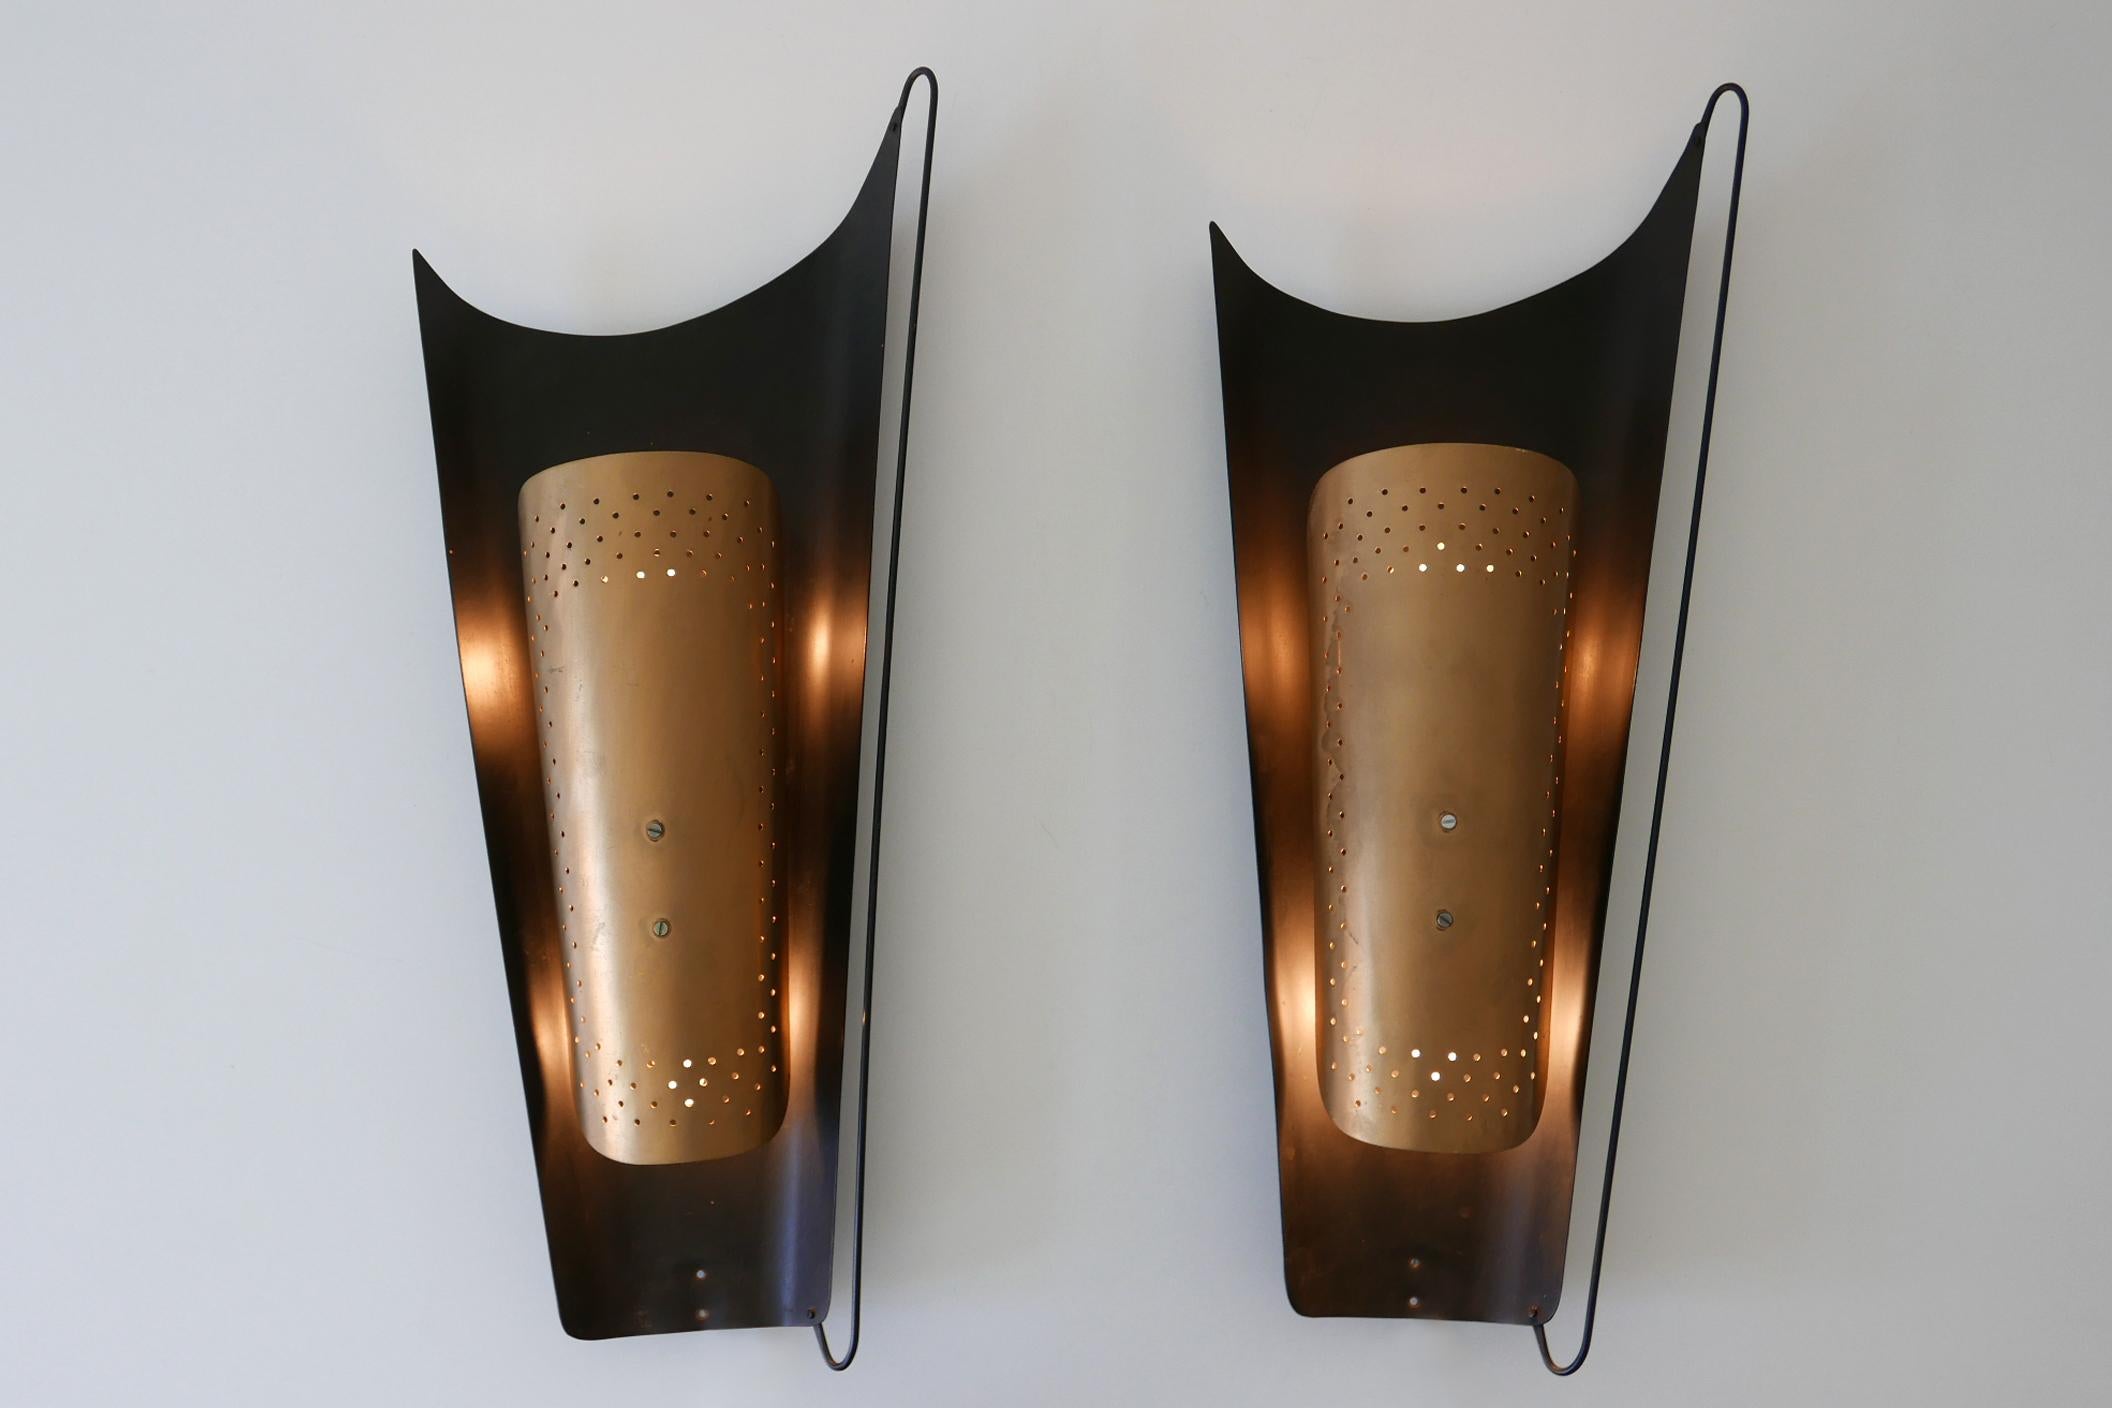 Mid-20th Century Set of Two Huge Mid-Century Modern Wall Lamps or Sconces, 1950s, Germany For Sale